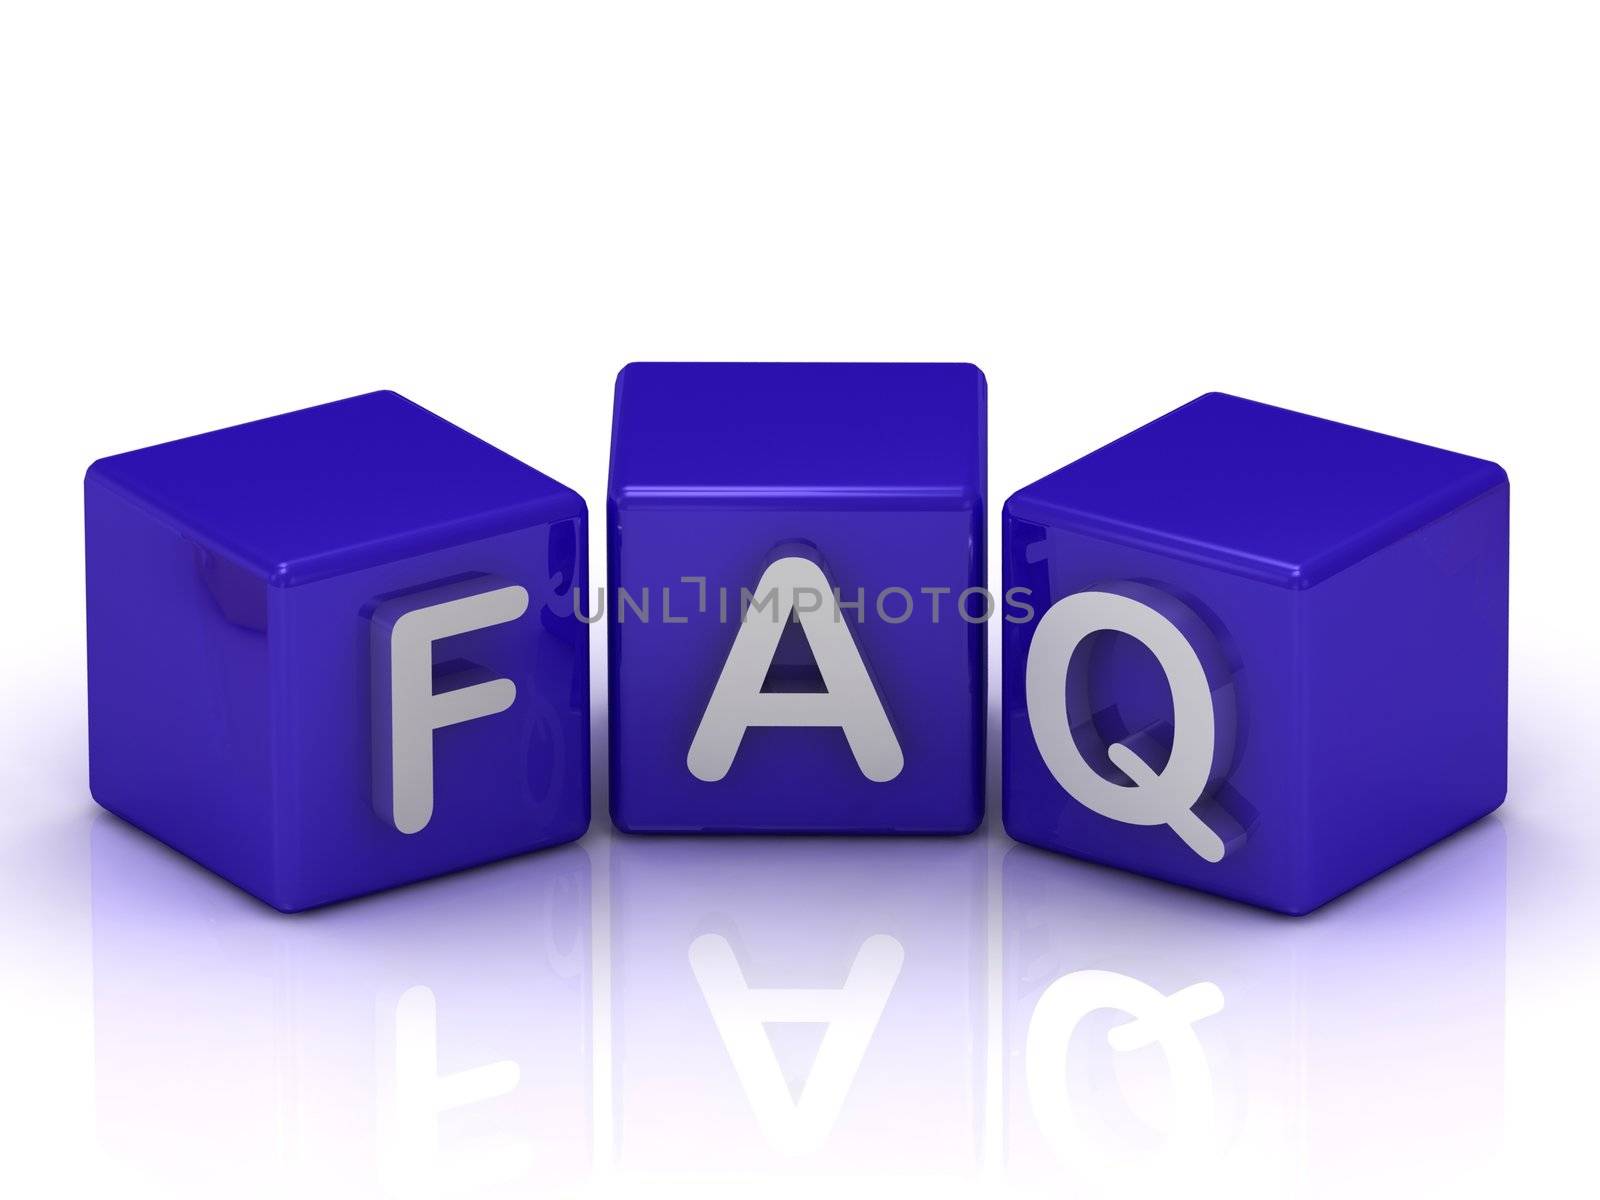 FAQ text on blue cubes on white background